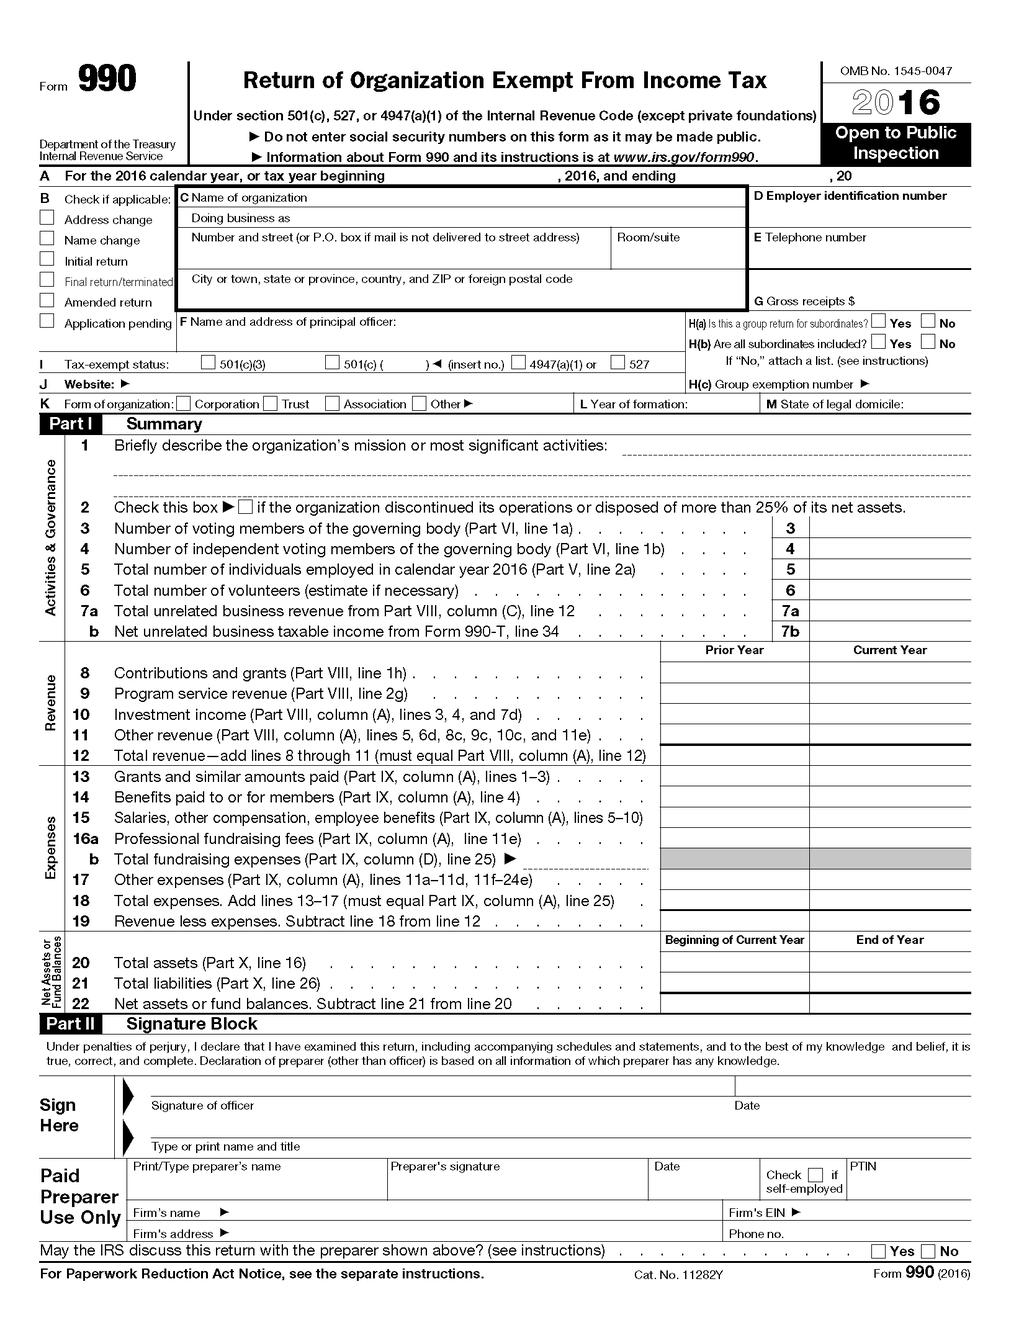 Appendix A This form can be completed